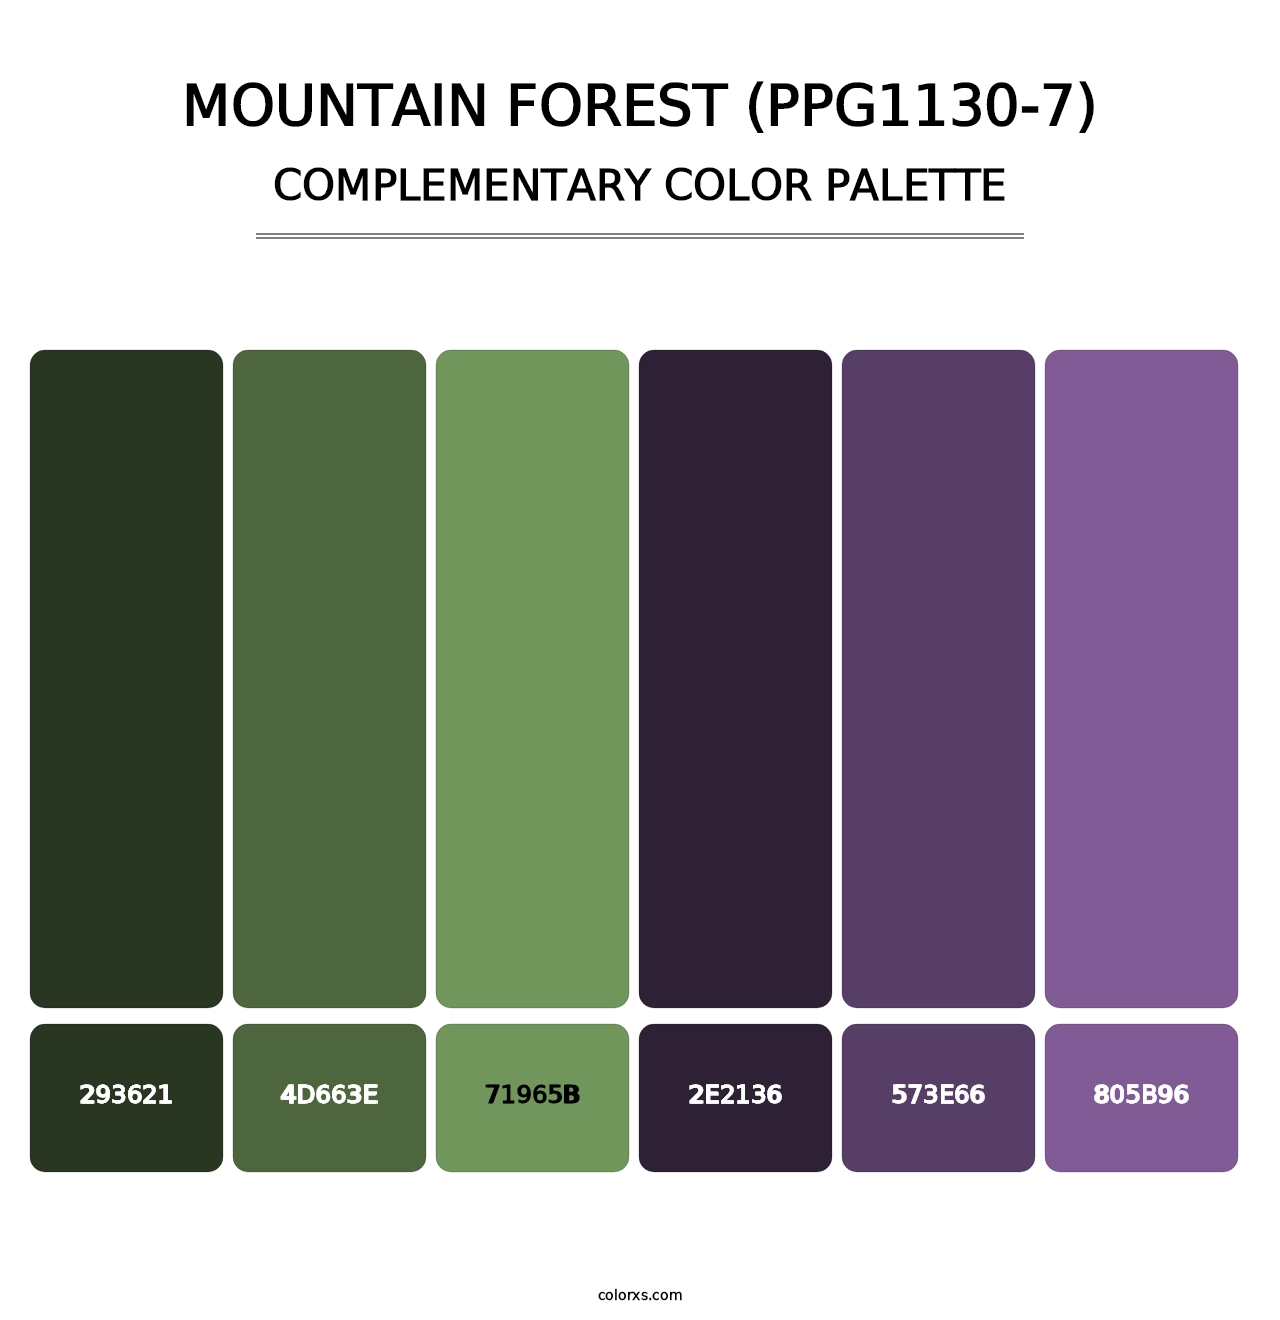 Mountain Forest (PPG1130-7) - Complementary Color Palette